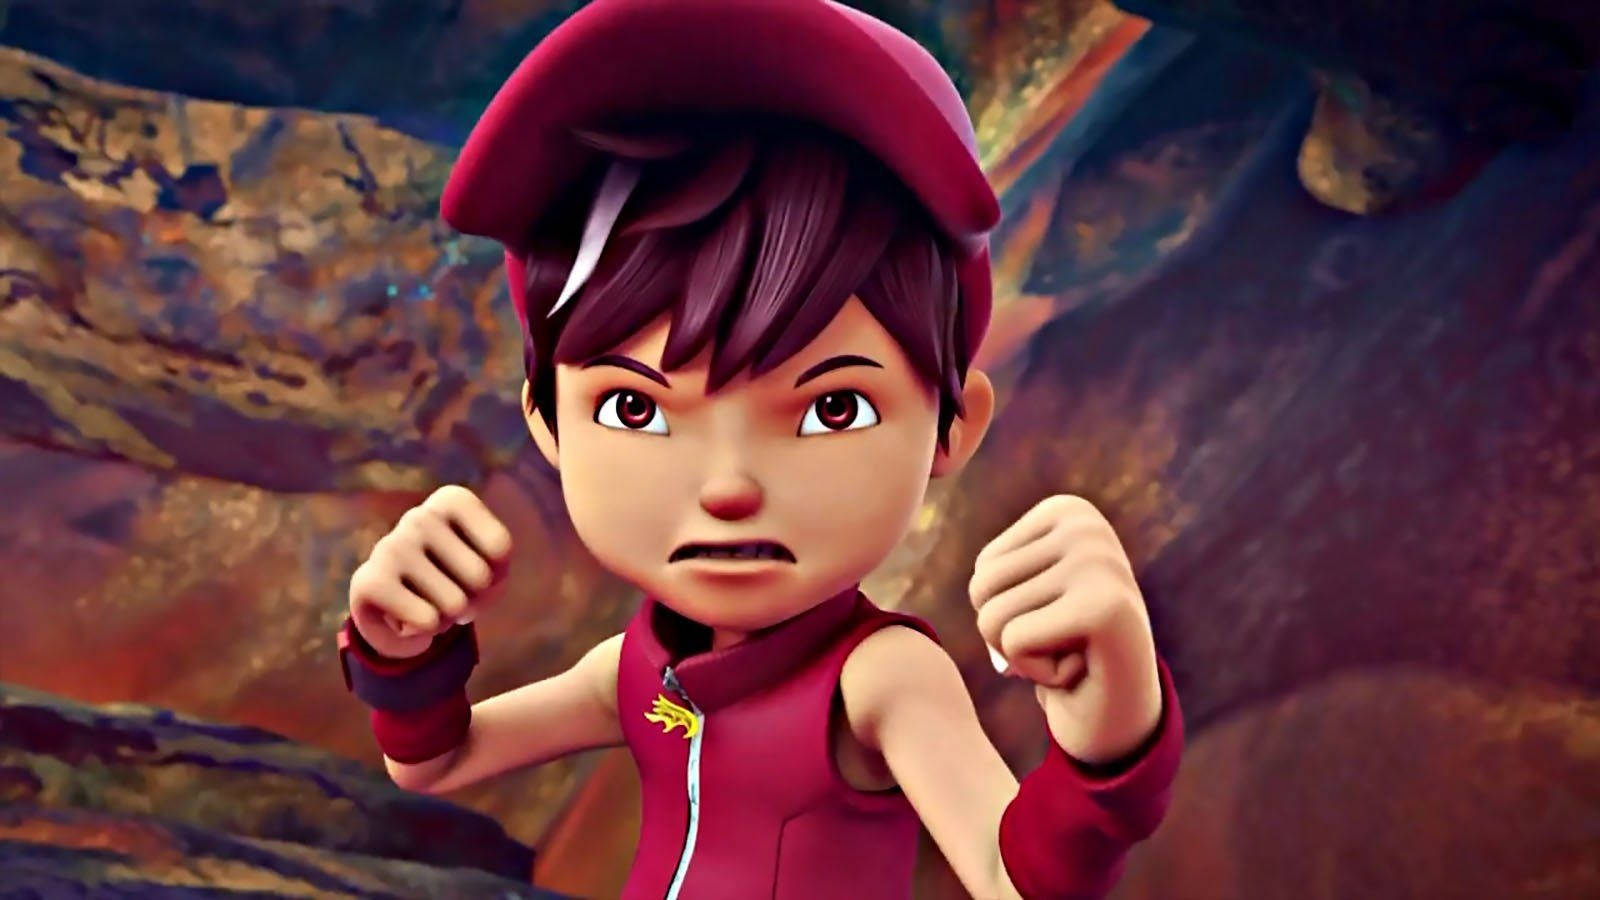 Caption: Exciting Image Of Boboiboy In Hd Wallpaper